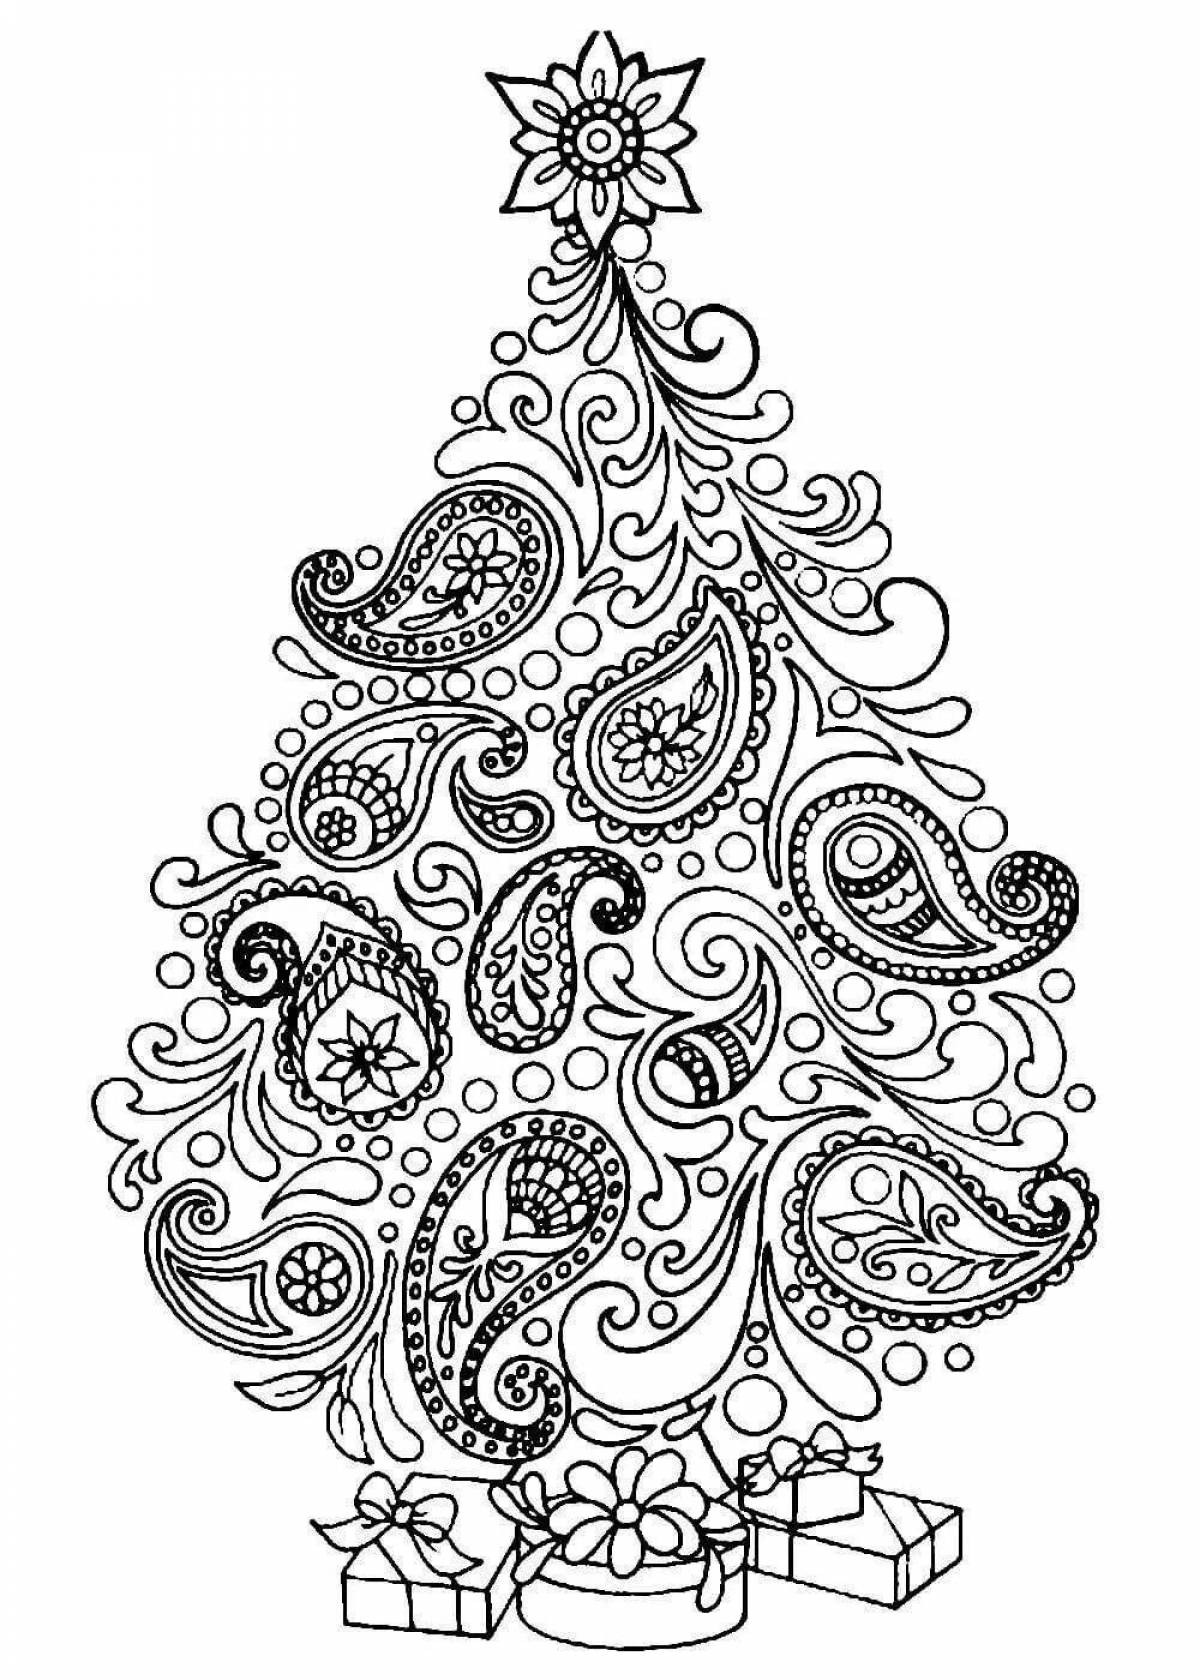 Colorful coloring pages with Christmas patterns